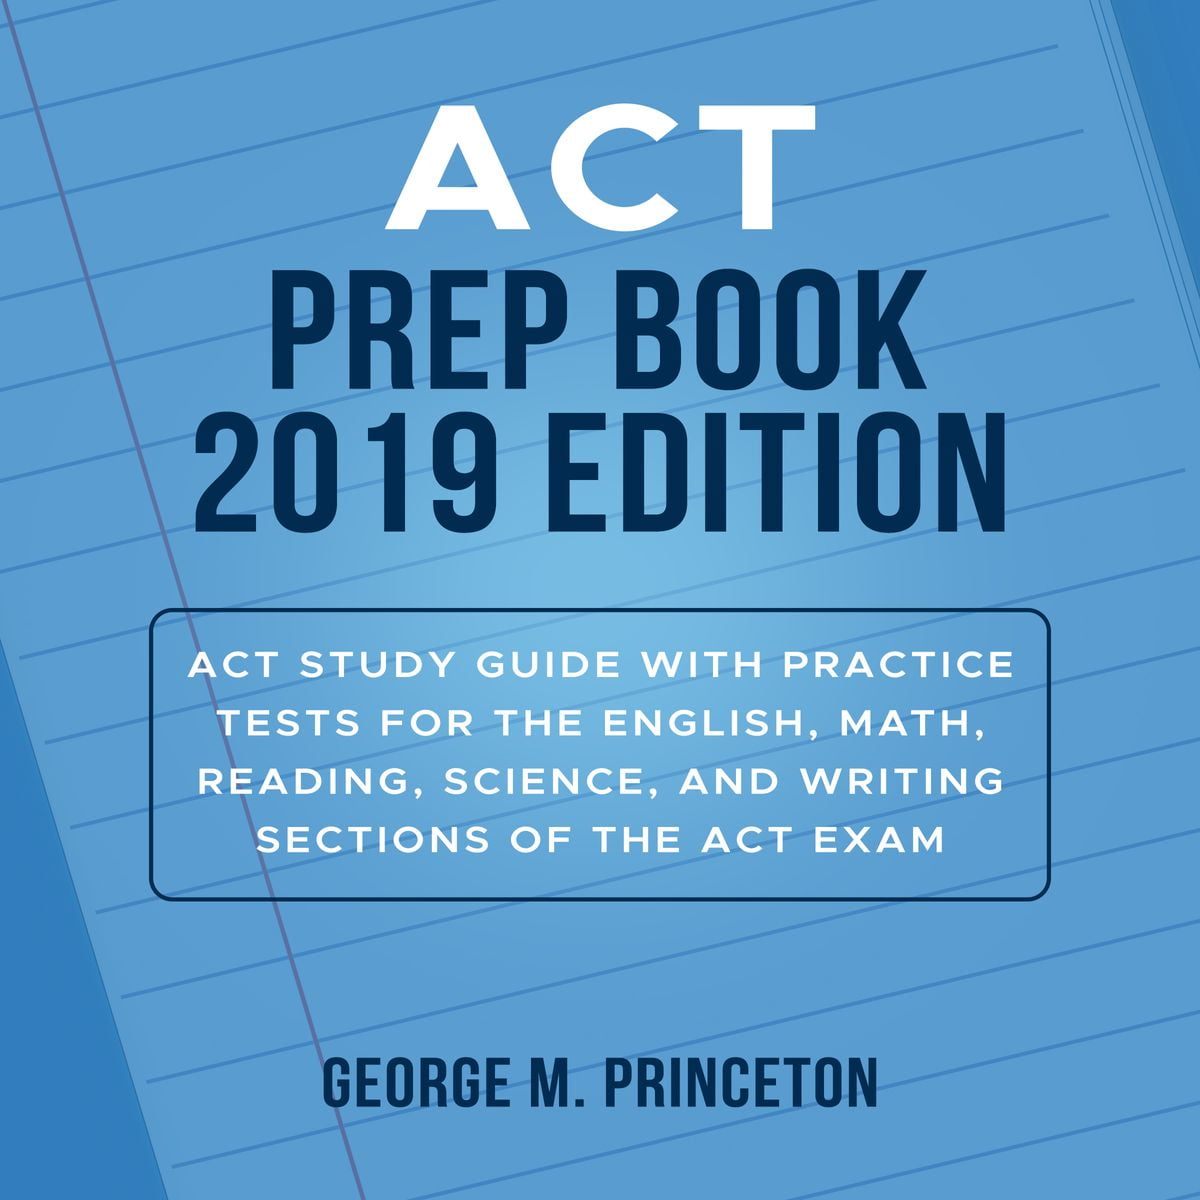 act-prep-book-2019-edition-act-study-guide-with-practice-tests-for-the-english-math-reading